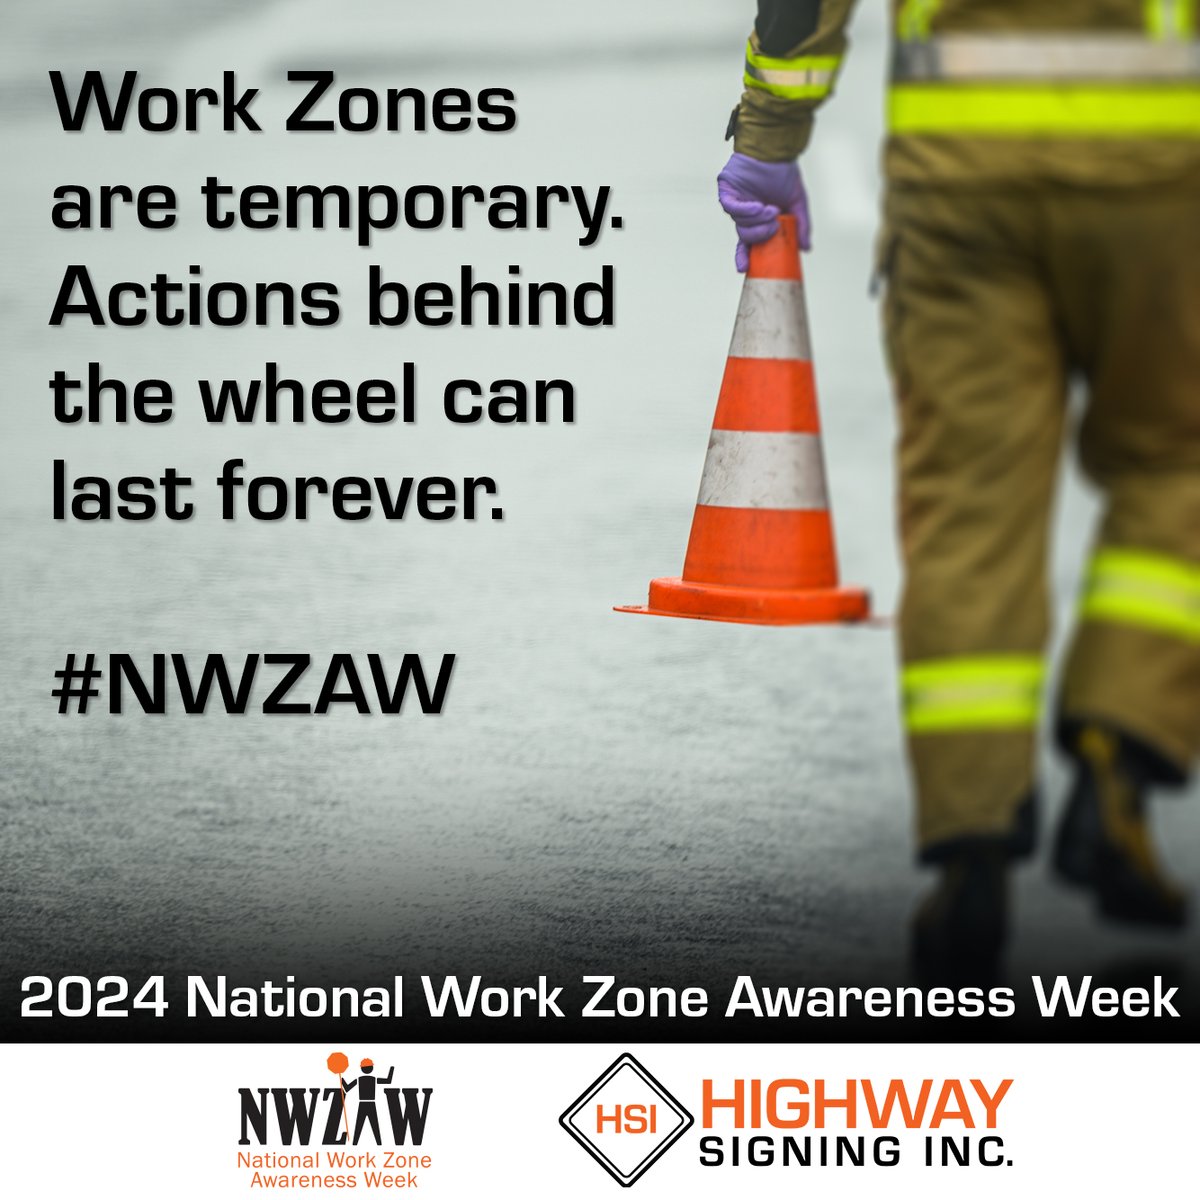 This National Work Zone Awareness Week, let’s remember: “Work zones are temporary. Actions behind the wheel can last forever.” 

#NWZAW #Orange4Safety #WorkZoneSafety #NWZAW2024 #DriveSafe #HighwayHeroes #HighwaySigningInc #safety #PavementMarking #construction #transportation